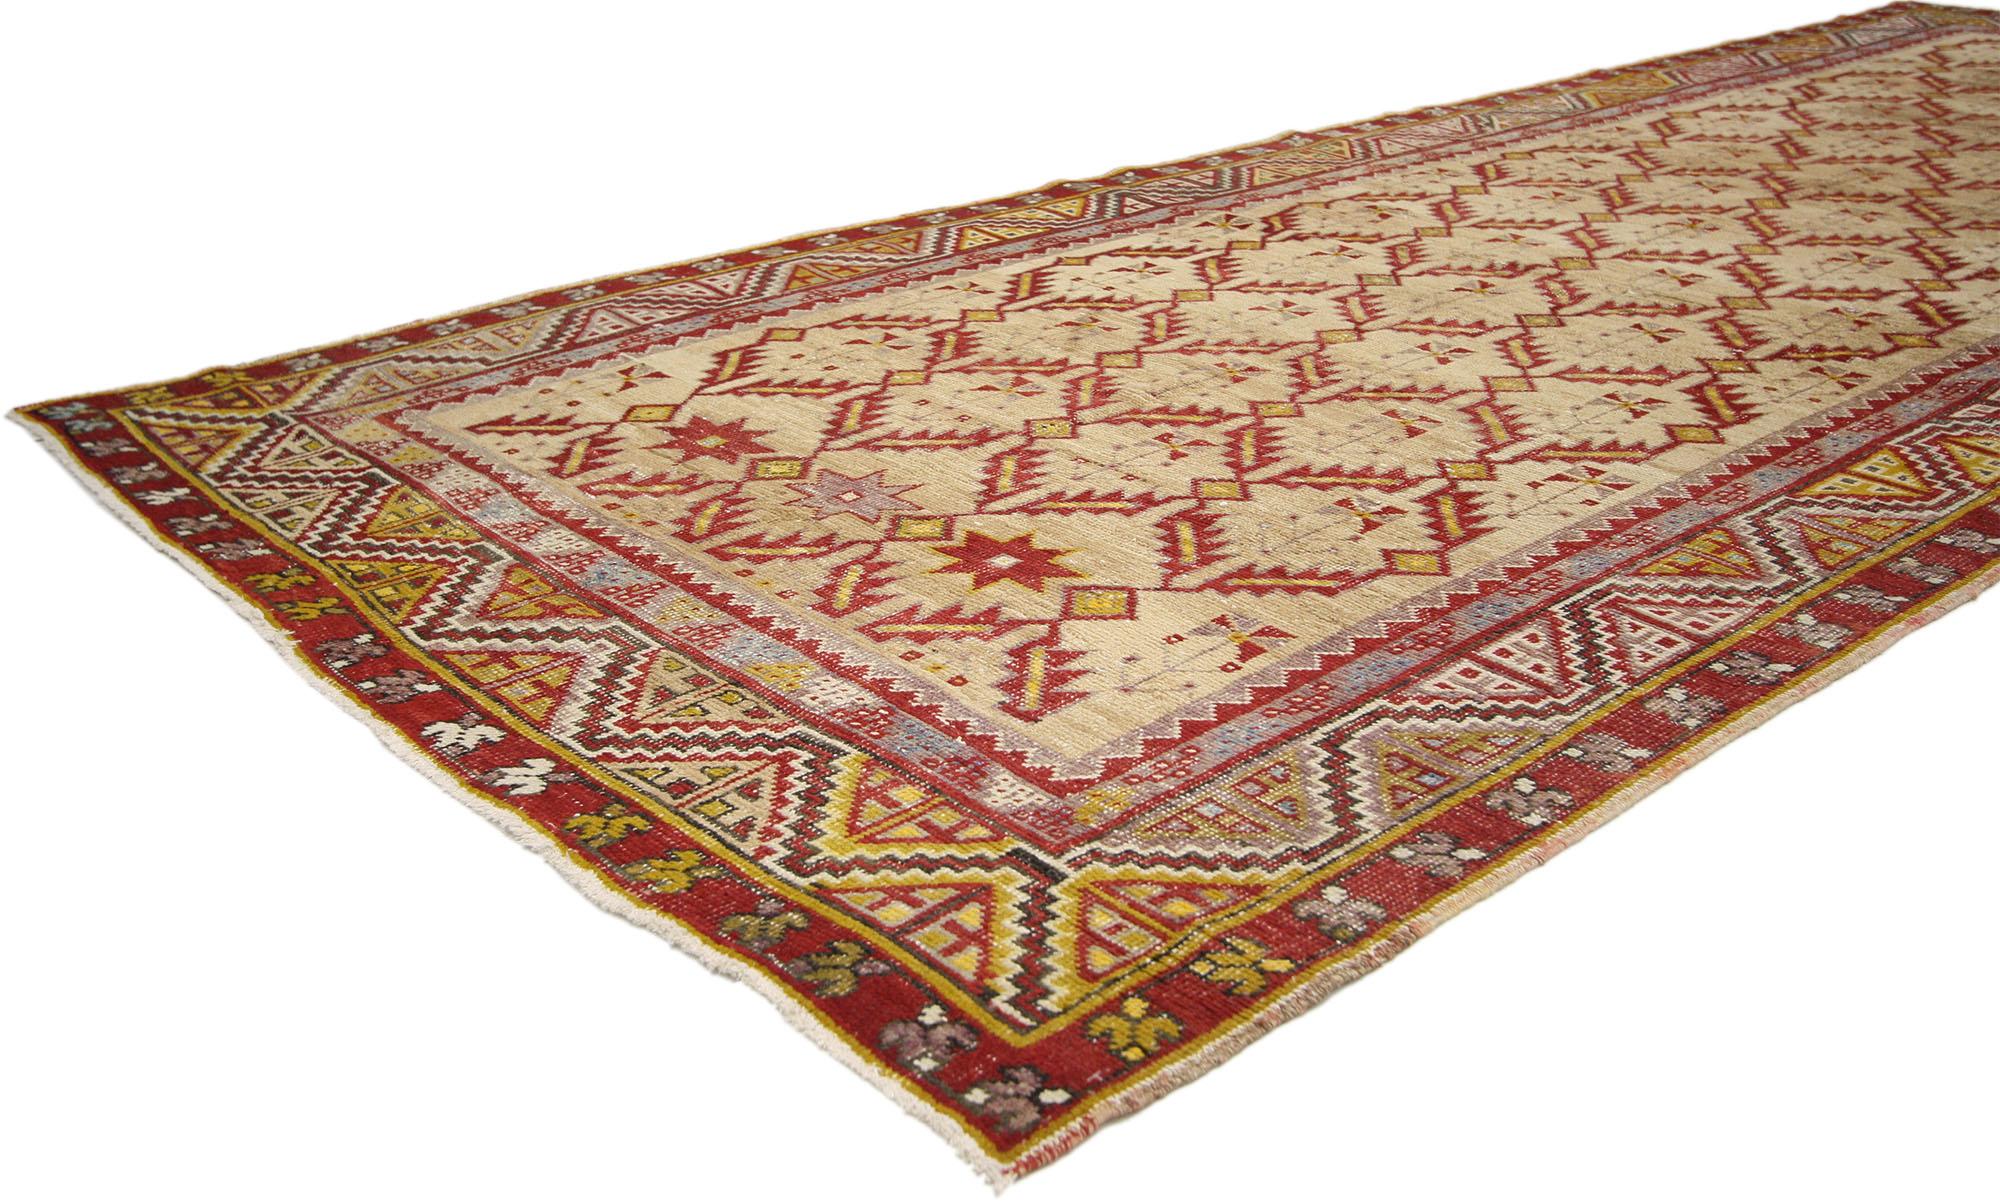 73773 vintage Turkish Oushak Runner with Modern Tribal style 04'09 X 12'06. Full of tiny details and a bold expressive design combined with exuberant colors and tribal style, this hand-knotted wool distressed vintage Turkish Oushak runner features